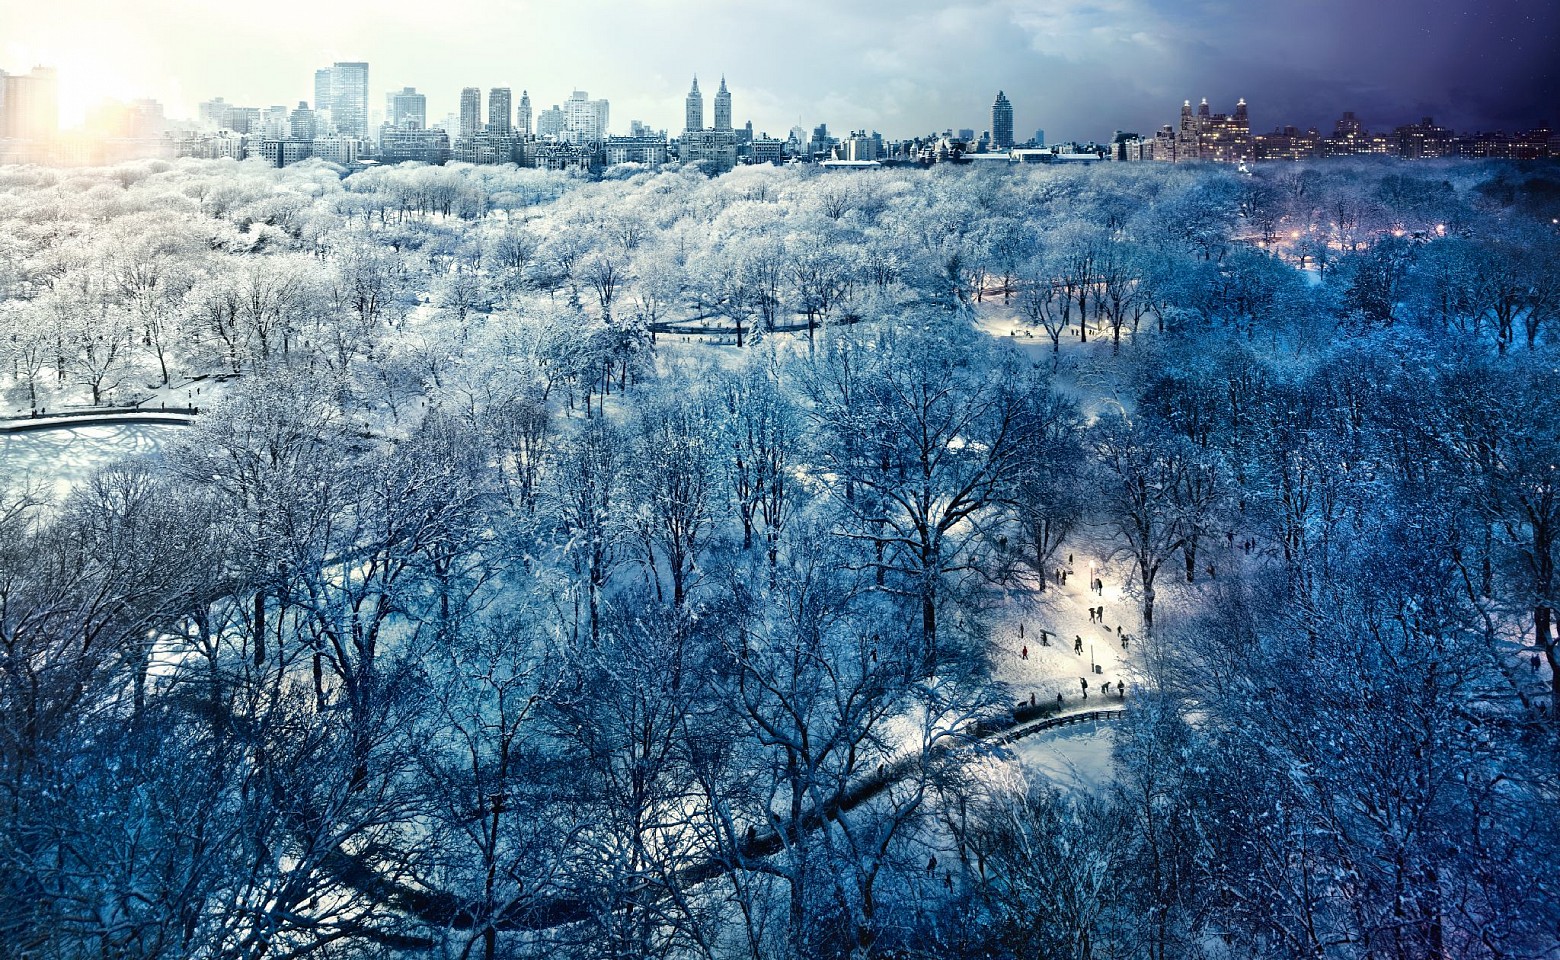 Stephen Wilkes, Central Park Snow, Day to Night, Ed. 17/50, 2010
FujiFlex Crystal Archive Print, 18 1/2 x 30 in. (47 x 76.2 cm)
SW025